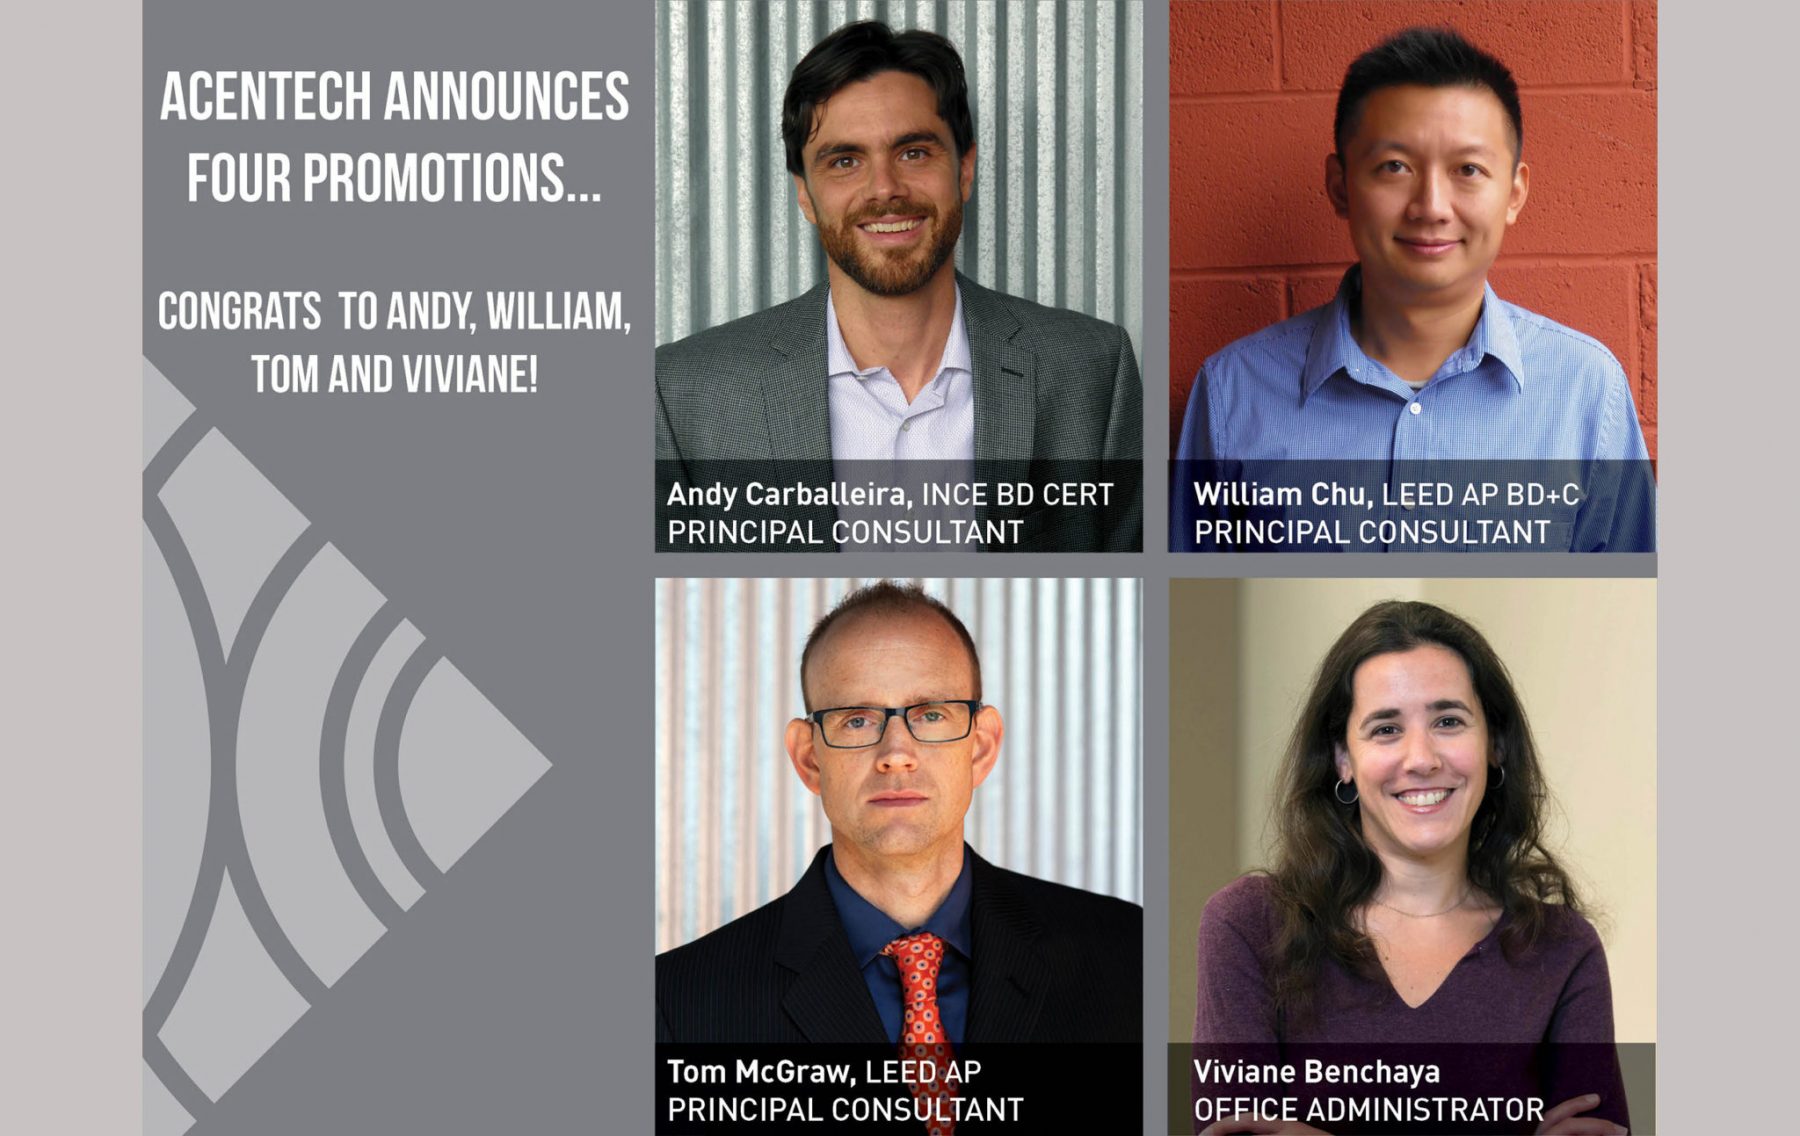 Acentech Promotions Announcement with Andy Carballeira, William Chu, Tom McGraw and Viviance Benchaya